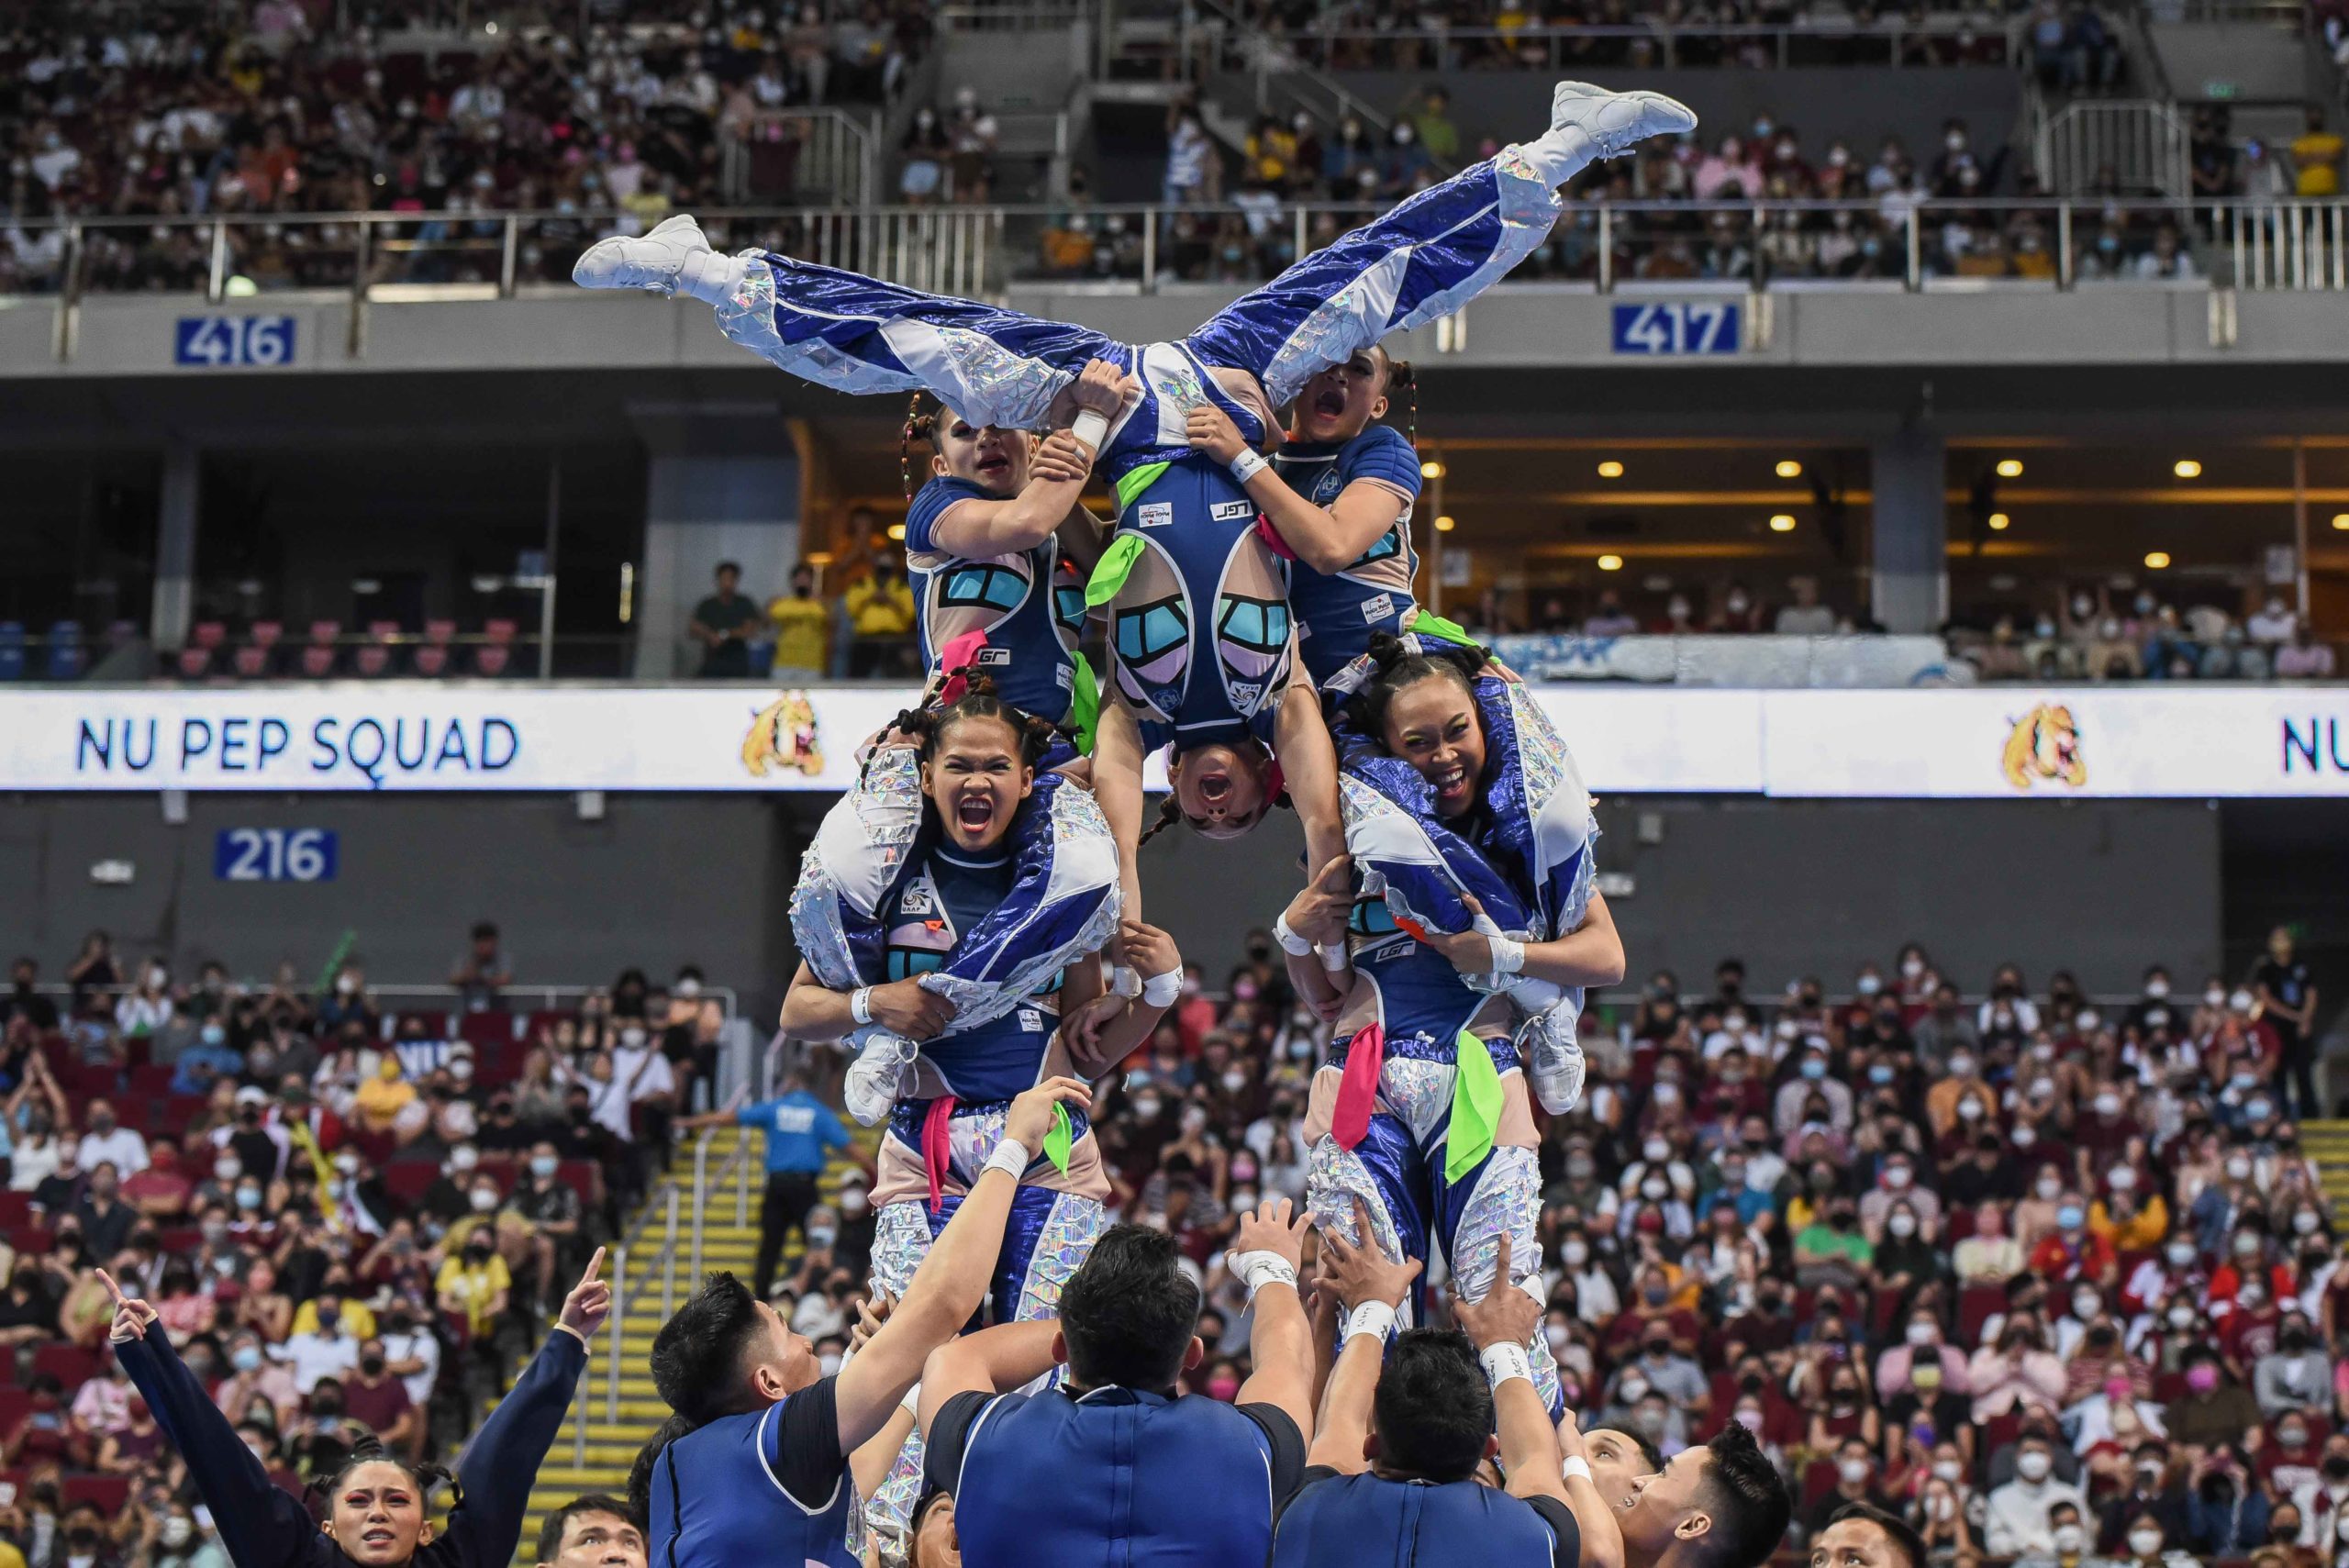 NU Pep Squad in UAAP Season 84 Cheering Contest. UAAP PHOTO